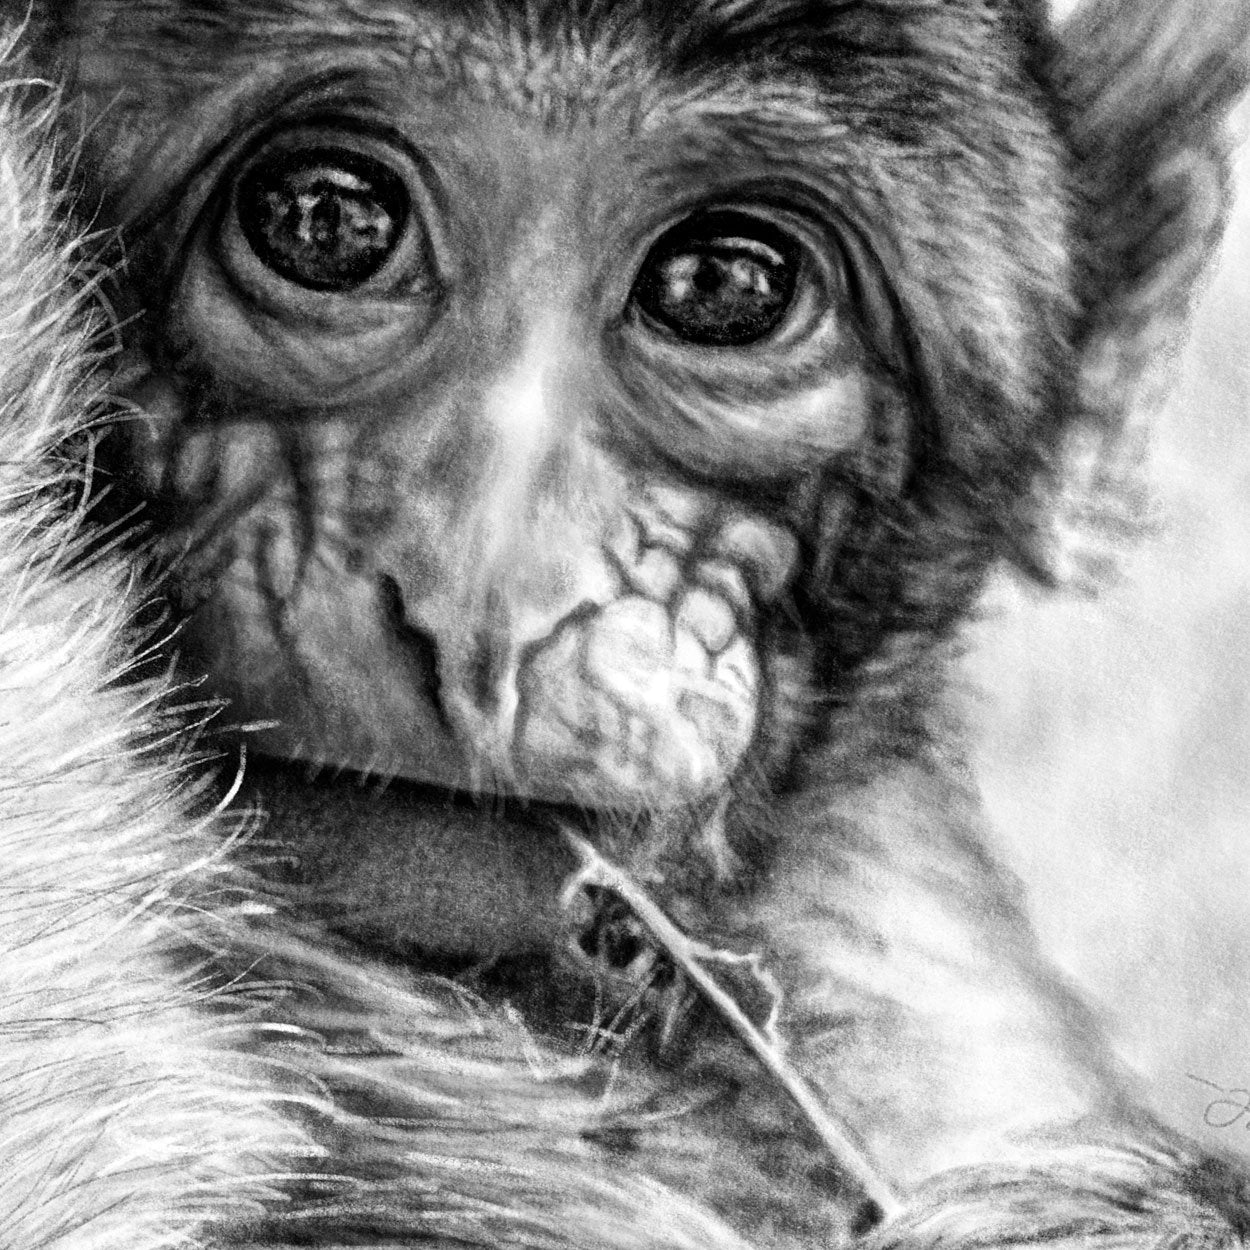 Macaque Baby Drawing Close-up - The Thriving Wild